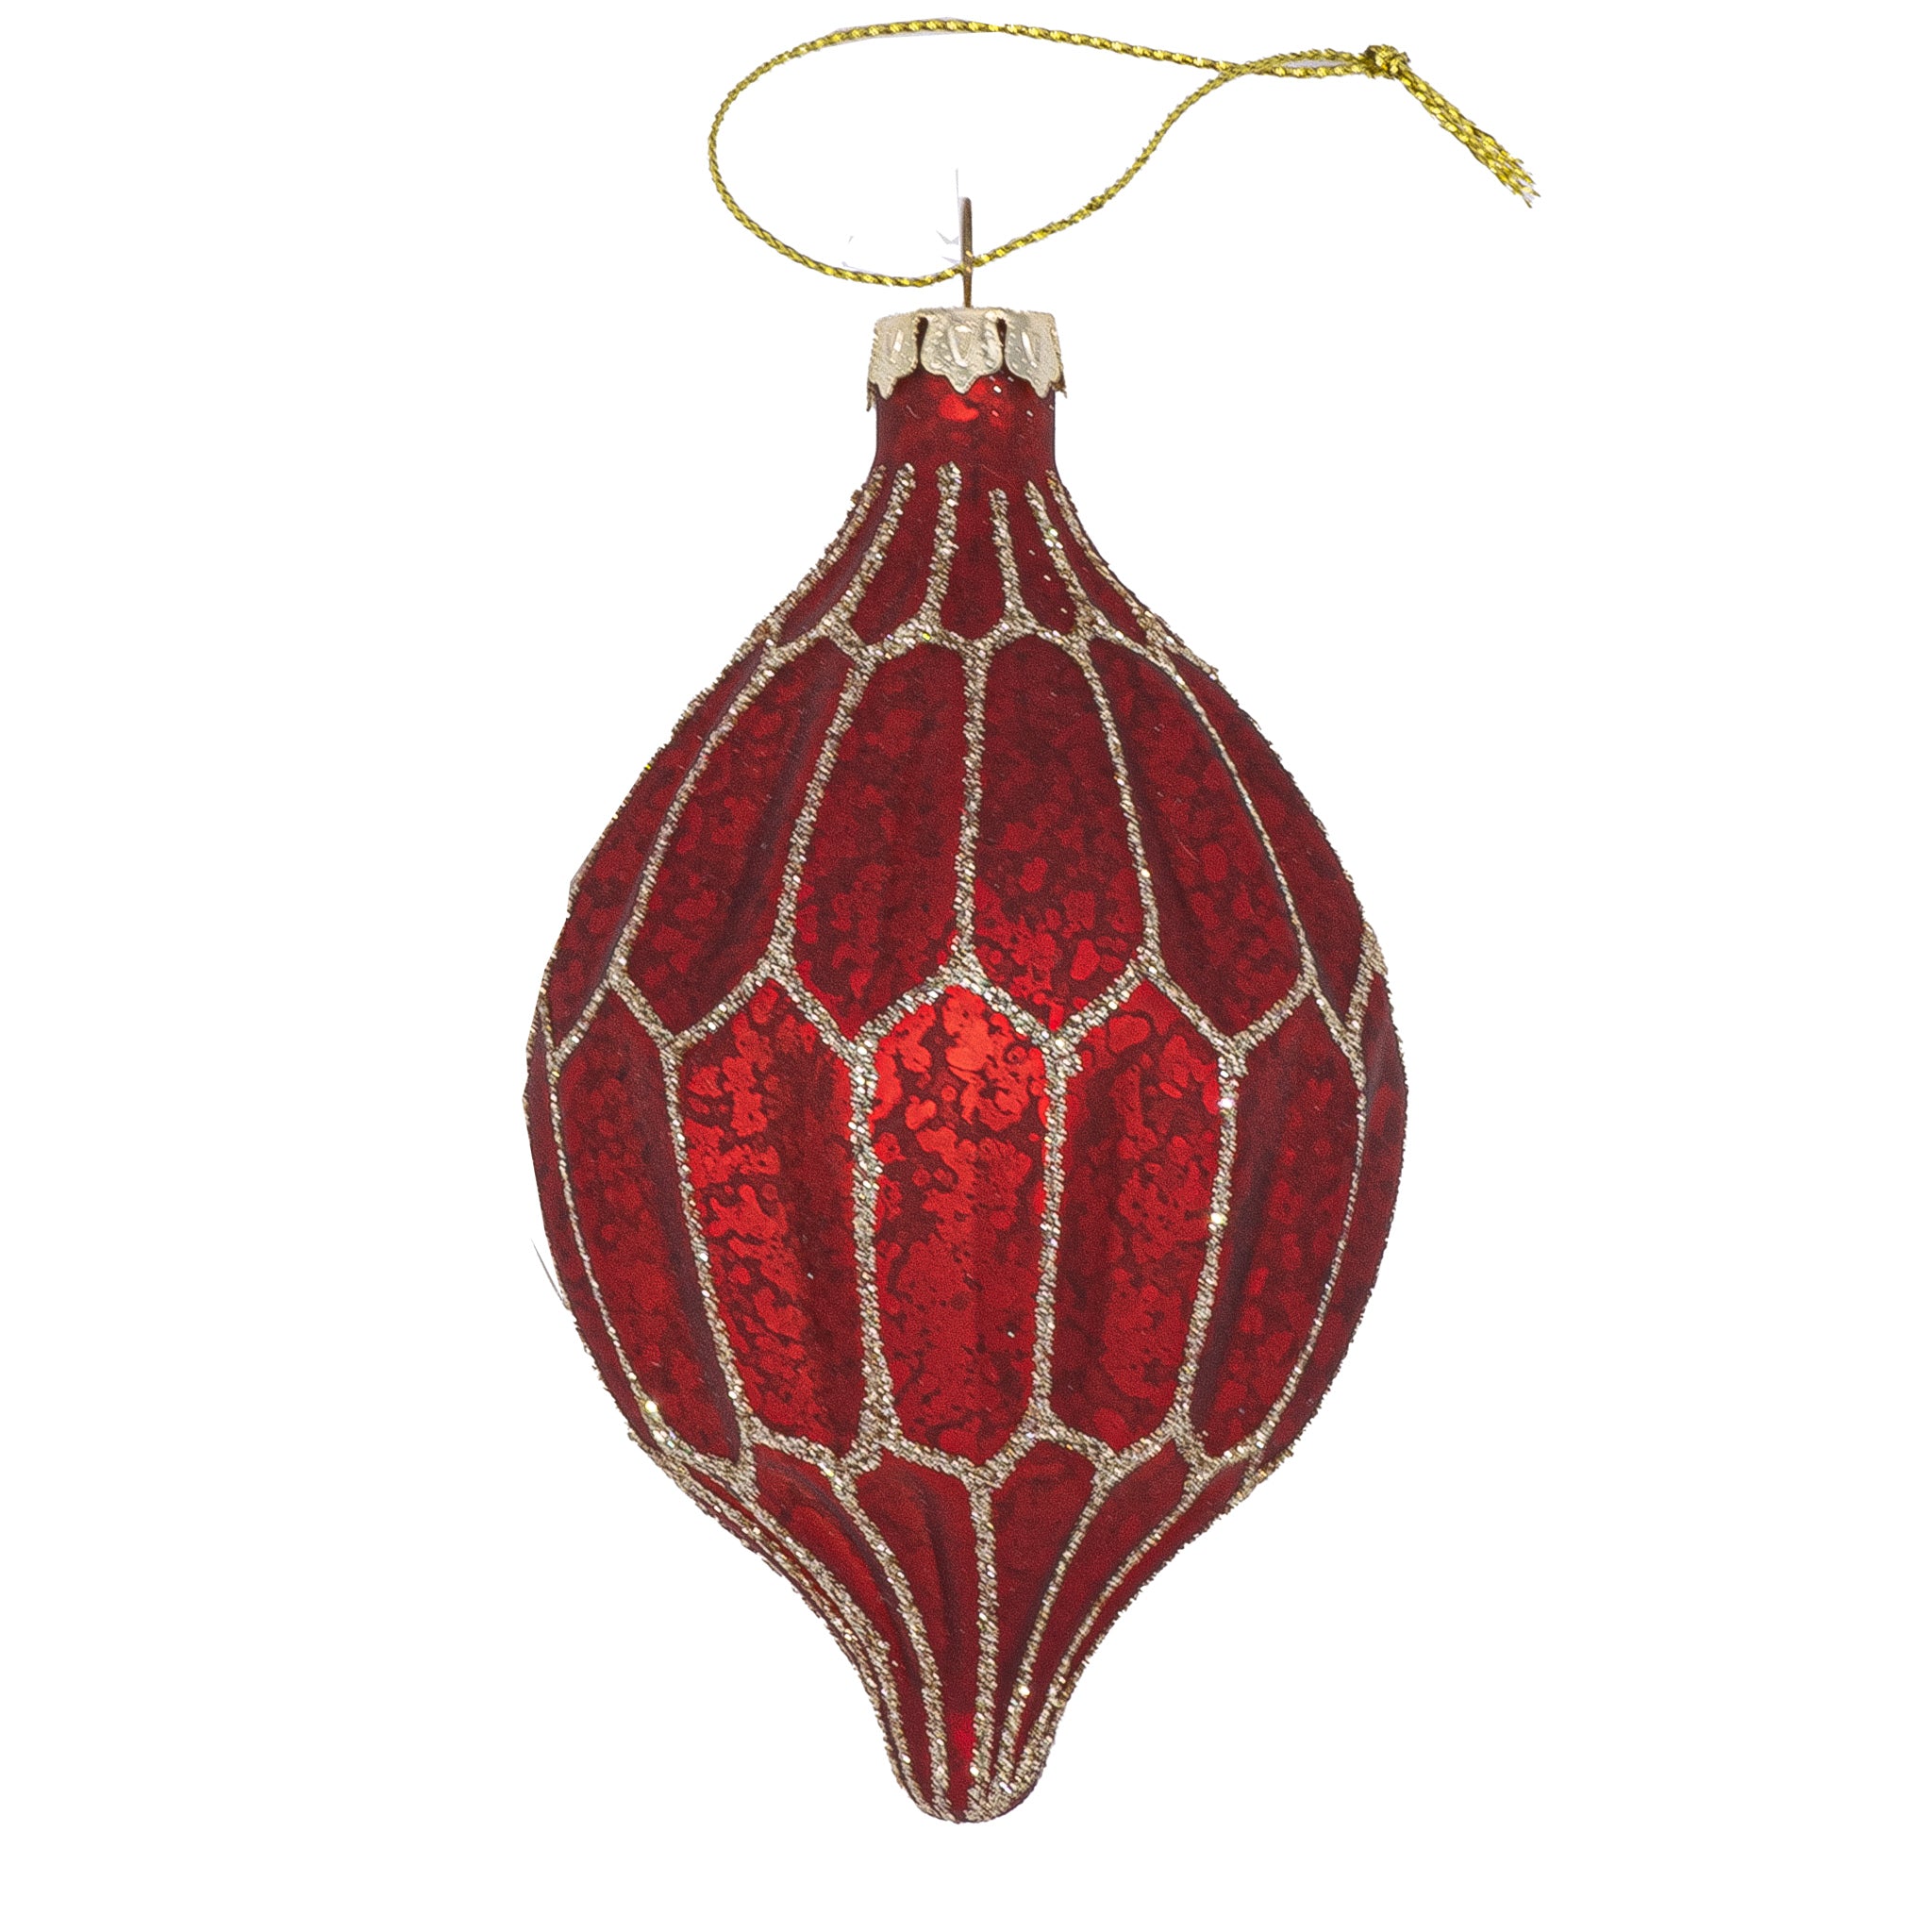 Olive shaped red Christmas bauble on white background